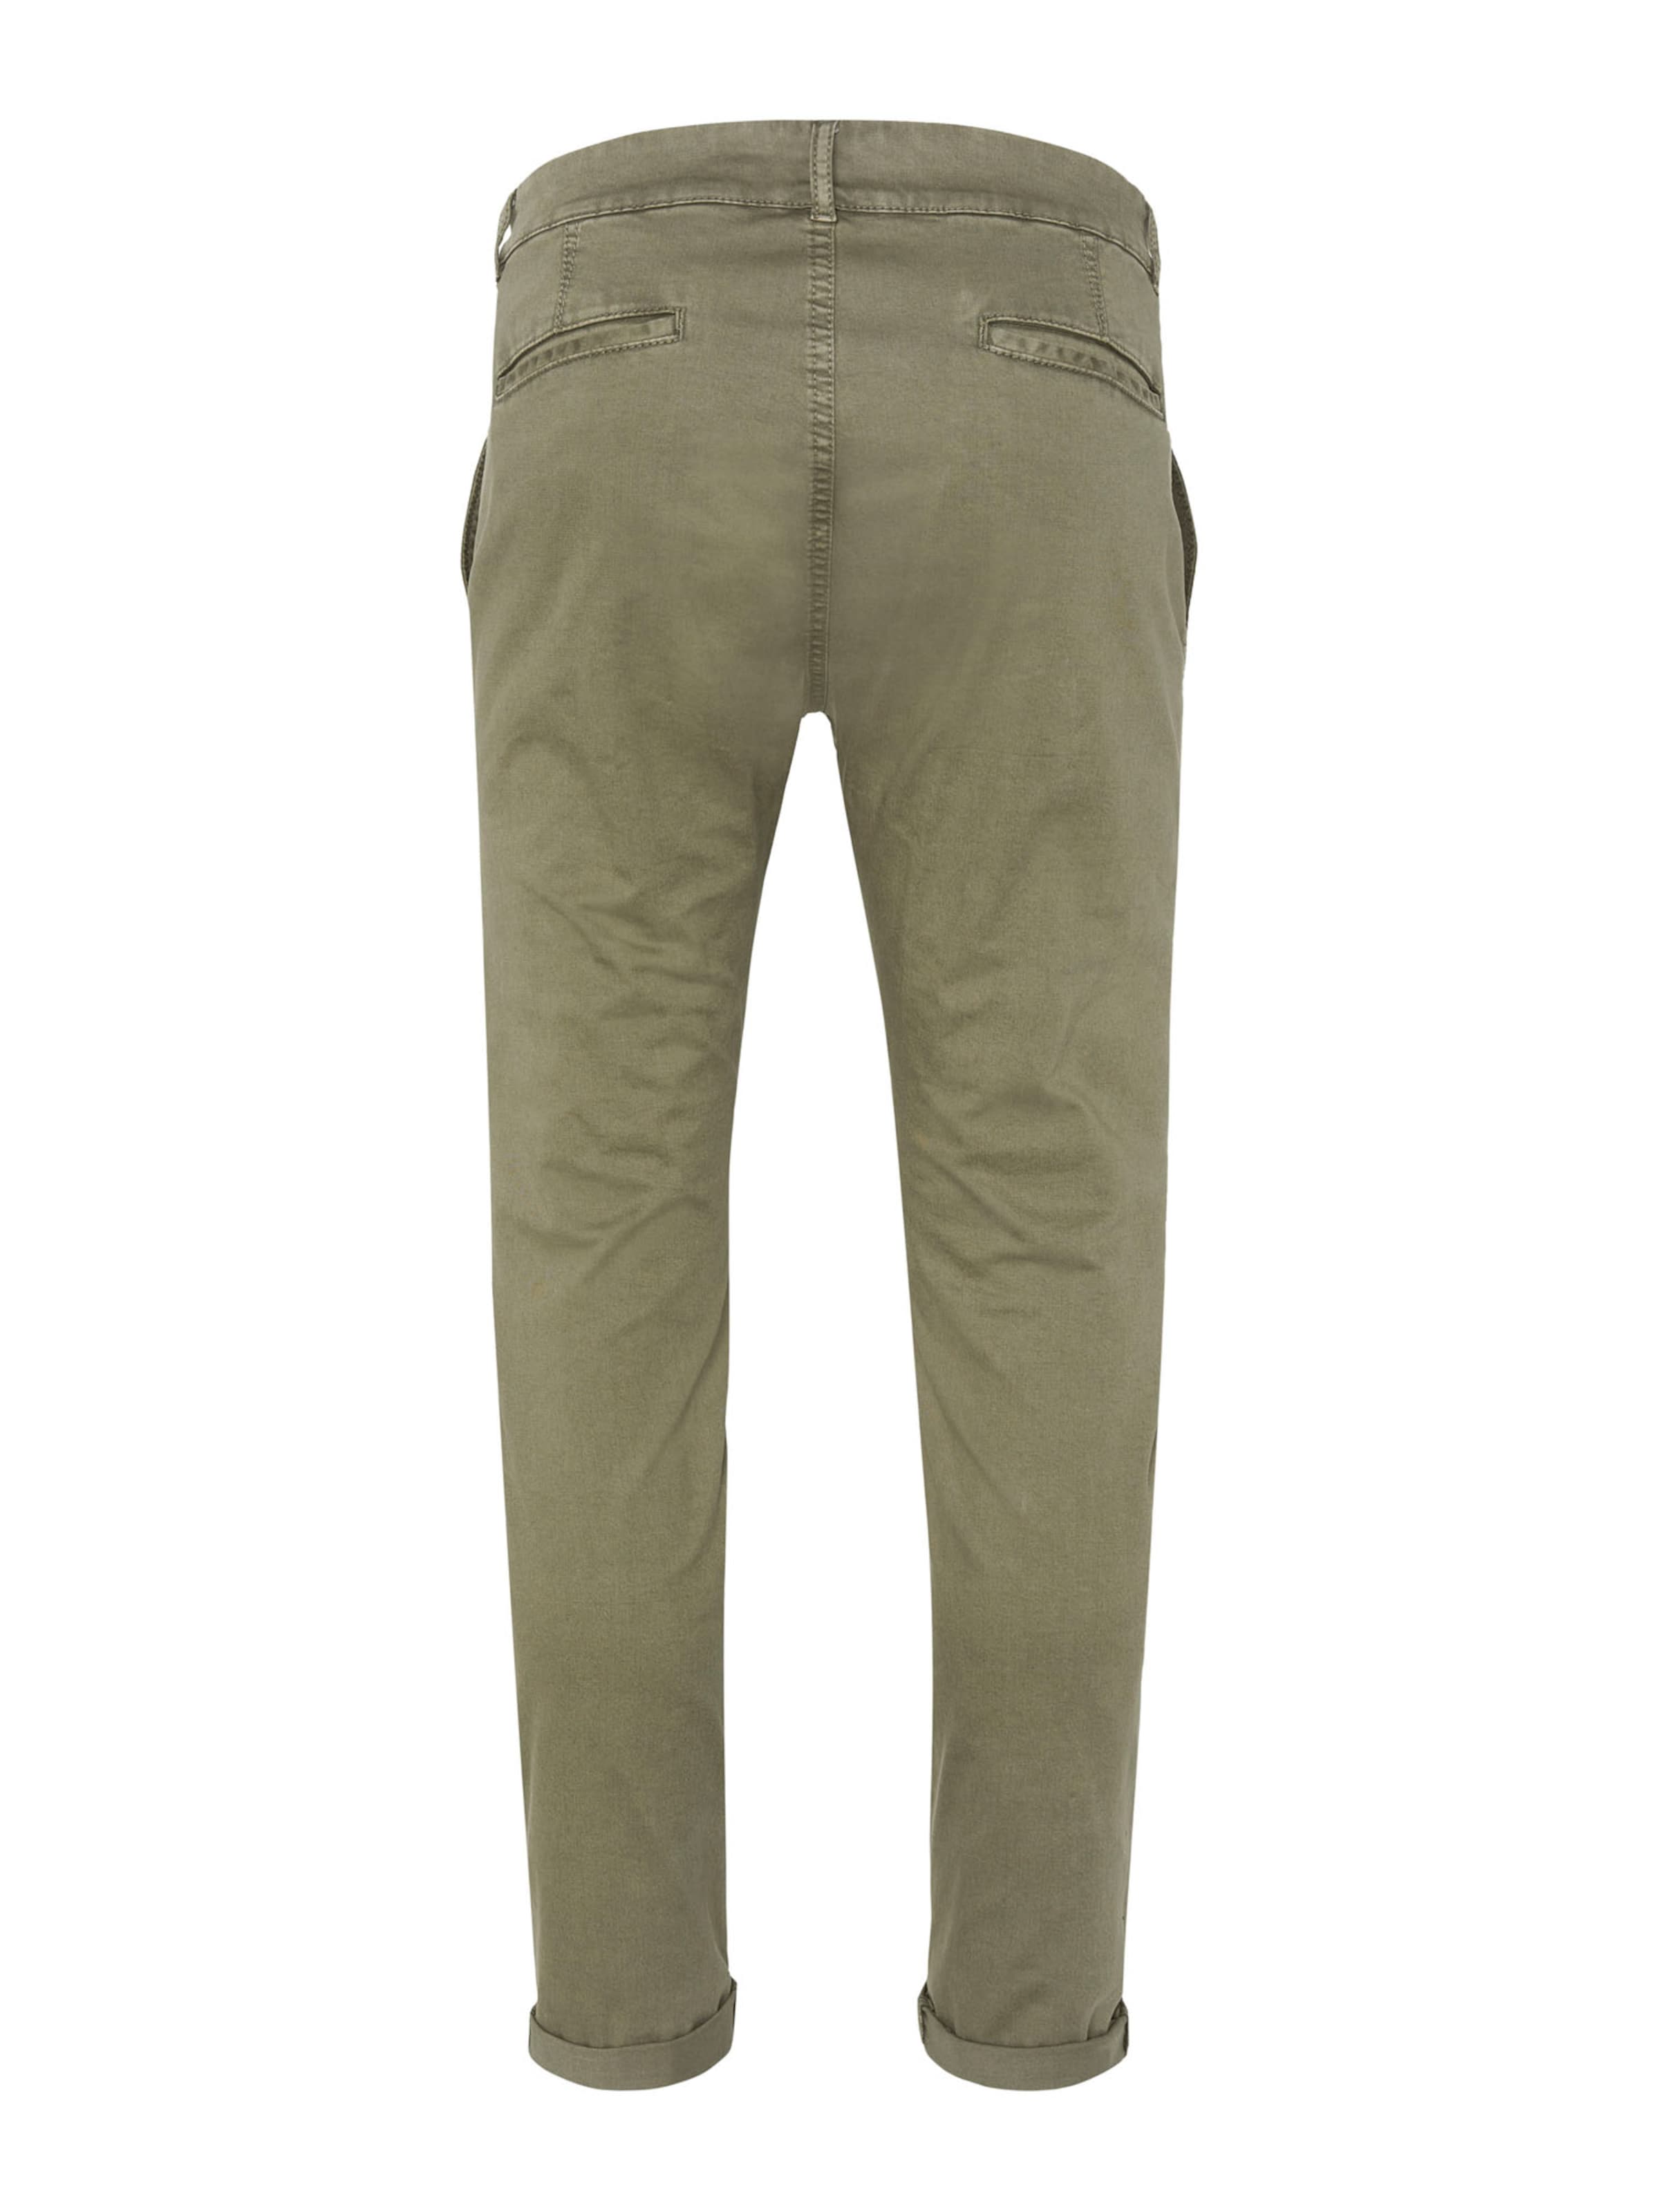 Occasions spéciales Pantalon chino CHIEMSEE en Olive 